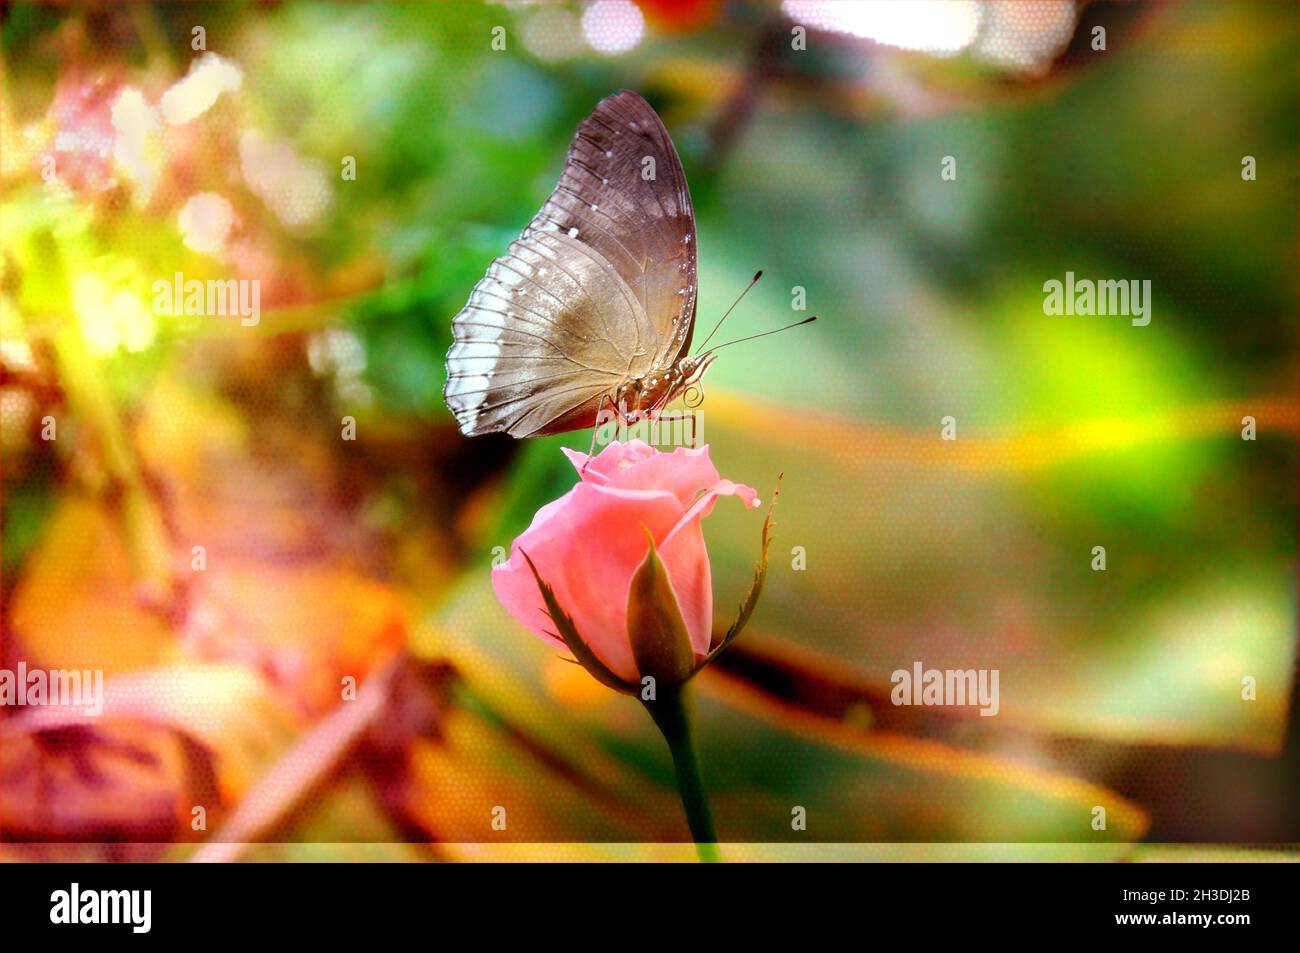 Beautiful flower and butterfly photography Stock Photo